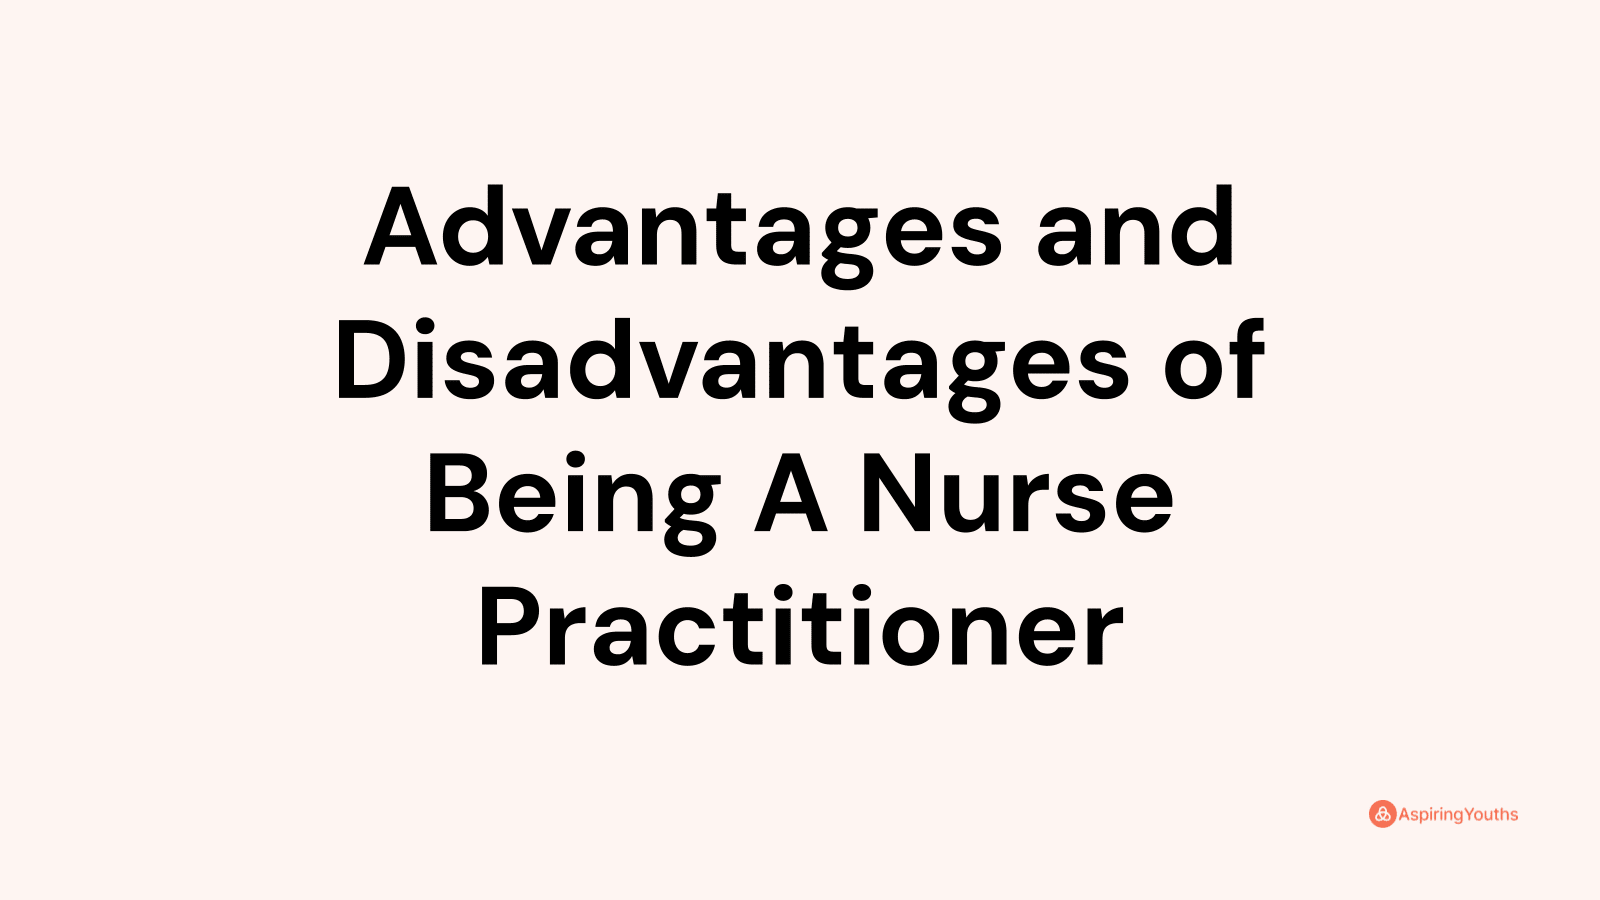 Advantages and disadvantages of Being A Nurse Practitioner